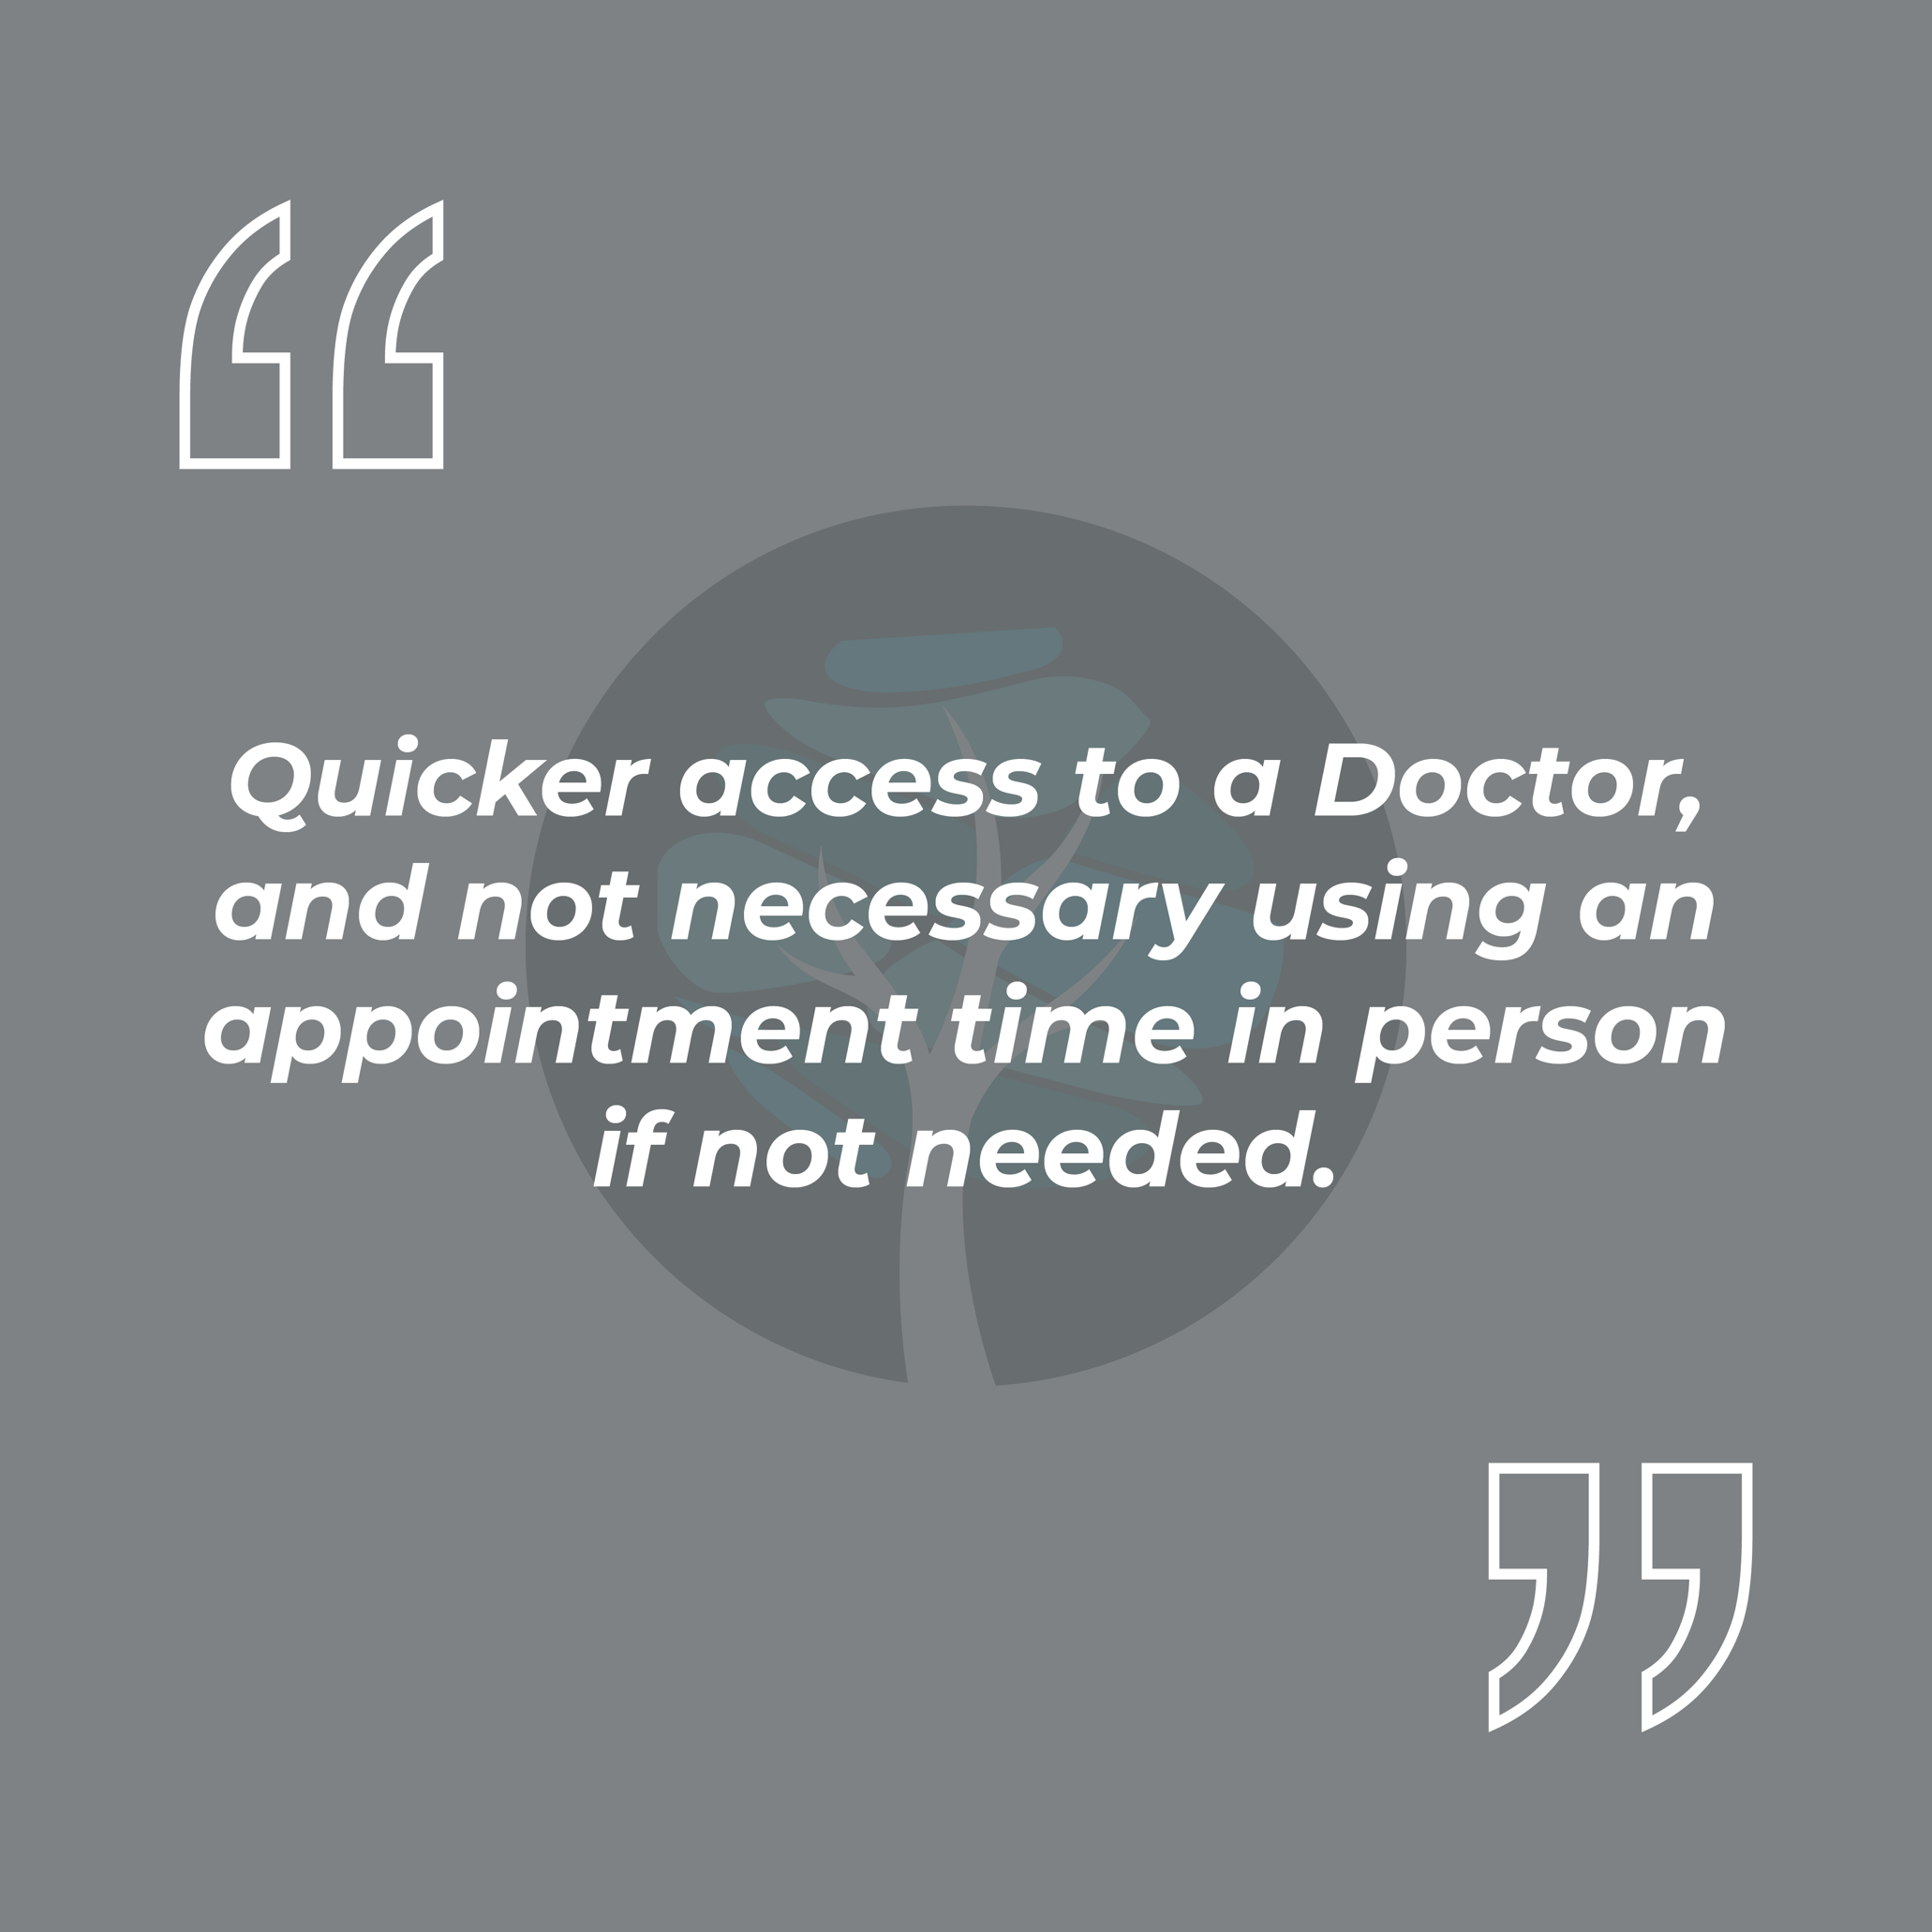 Quicker access to a Doctor, and not necessary using an appointment time in person if not needed.